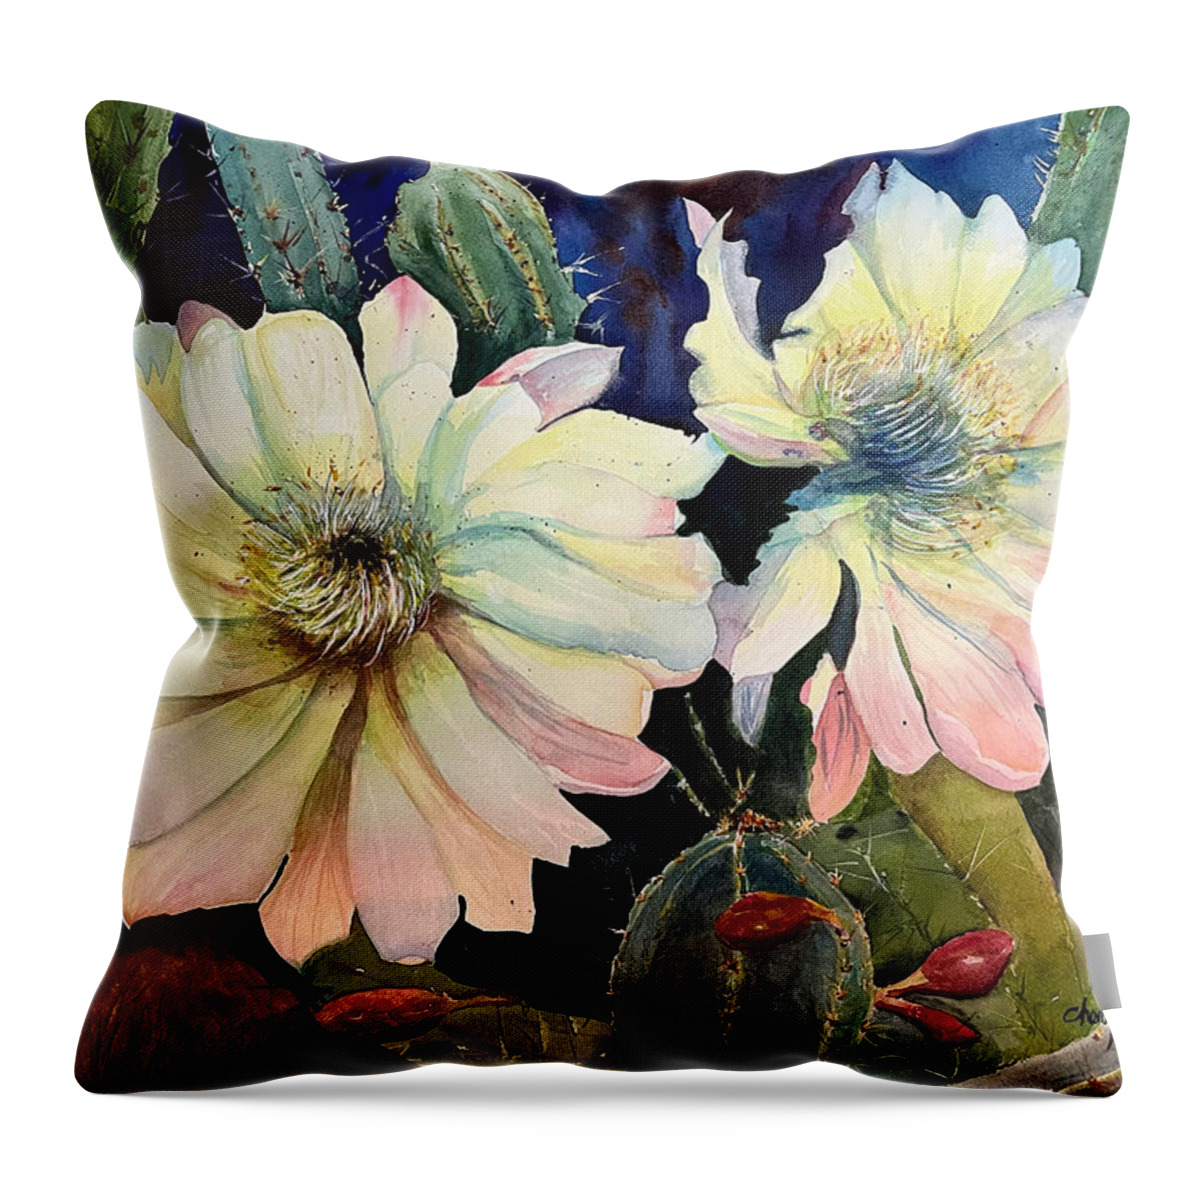 Flower Throw Pillow featuring the painting Desert Child by Cheryl Prather